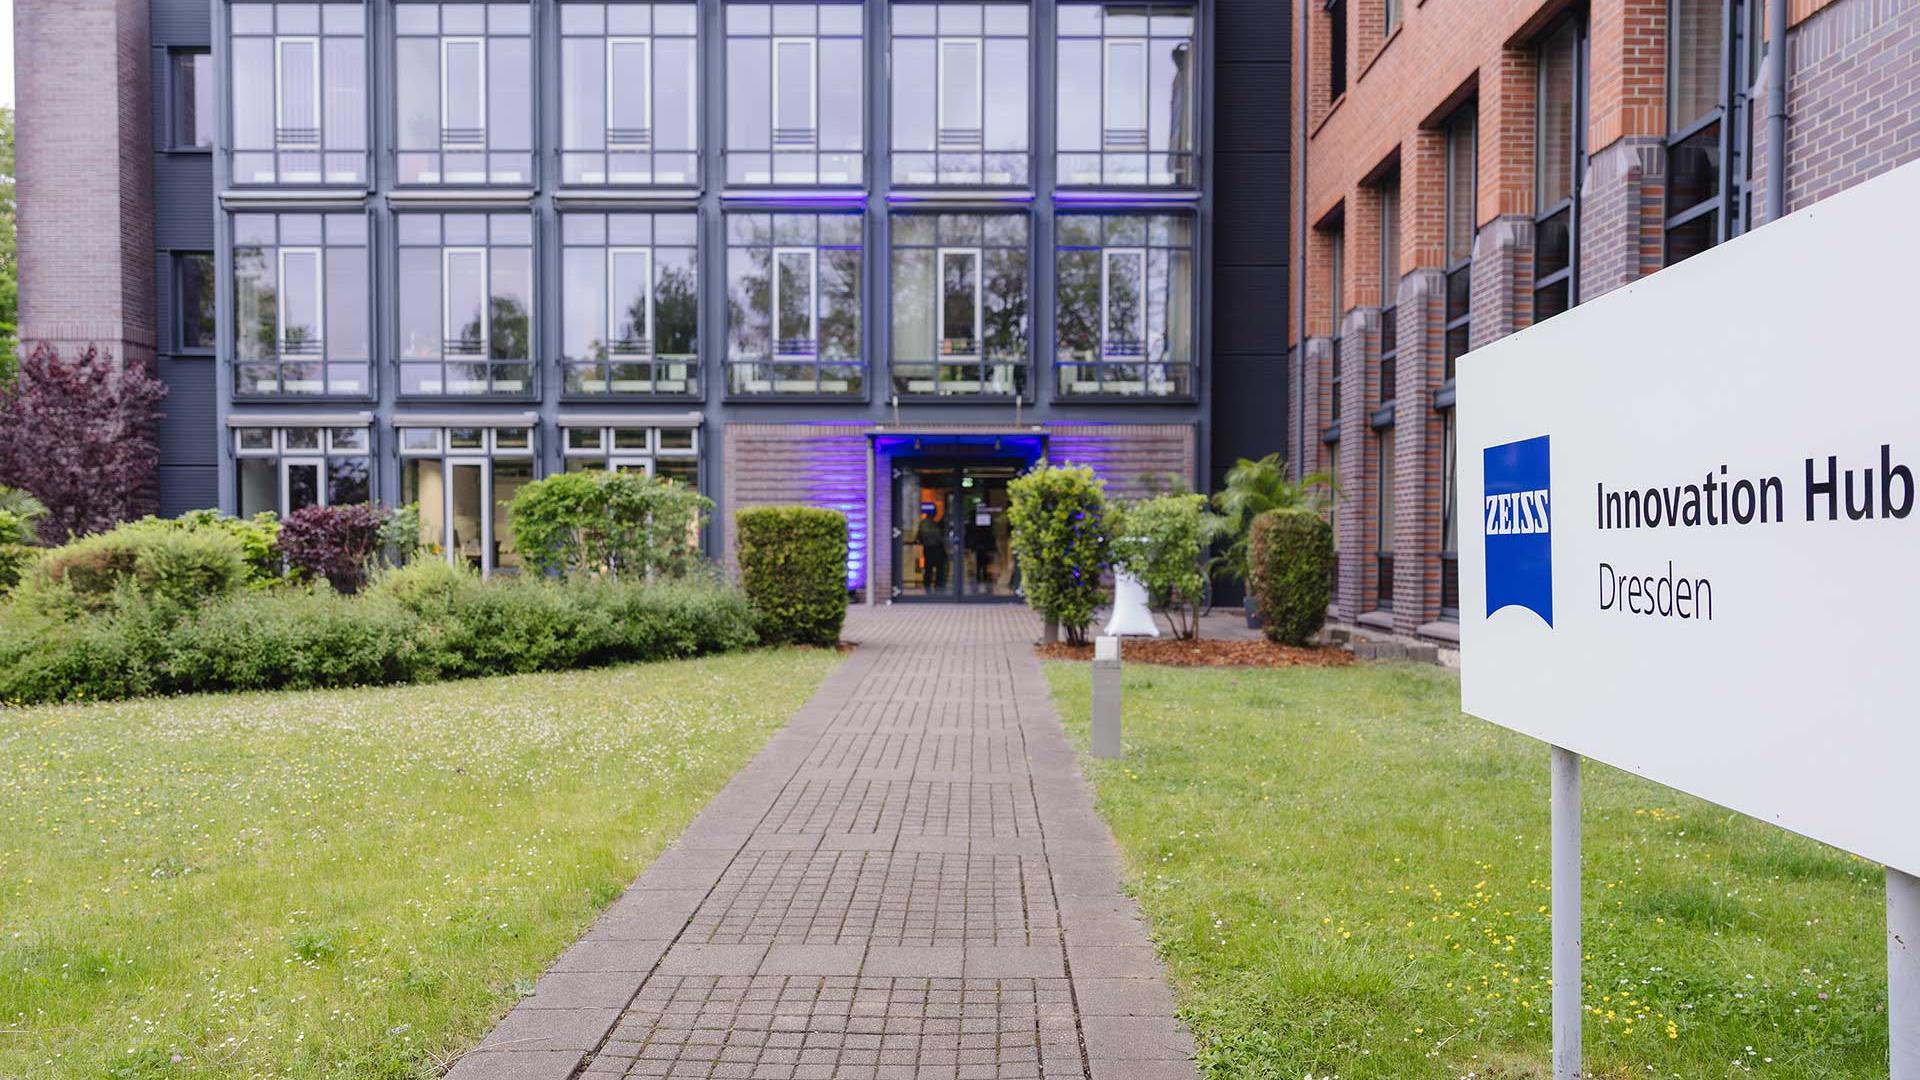 The ZEISS Innovation Hub Dresden has moved into a building in the Blasewitzer Straße, directly across from the campus of the Carl Gustav Carus University Hospital in Dresden.